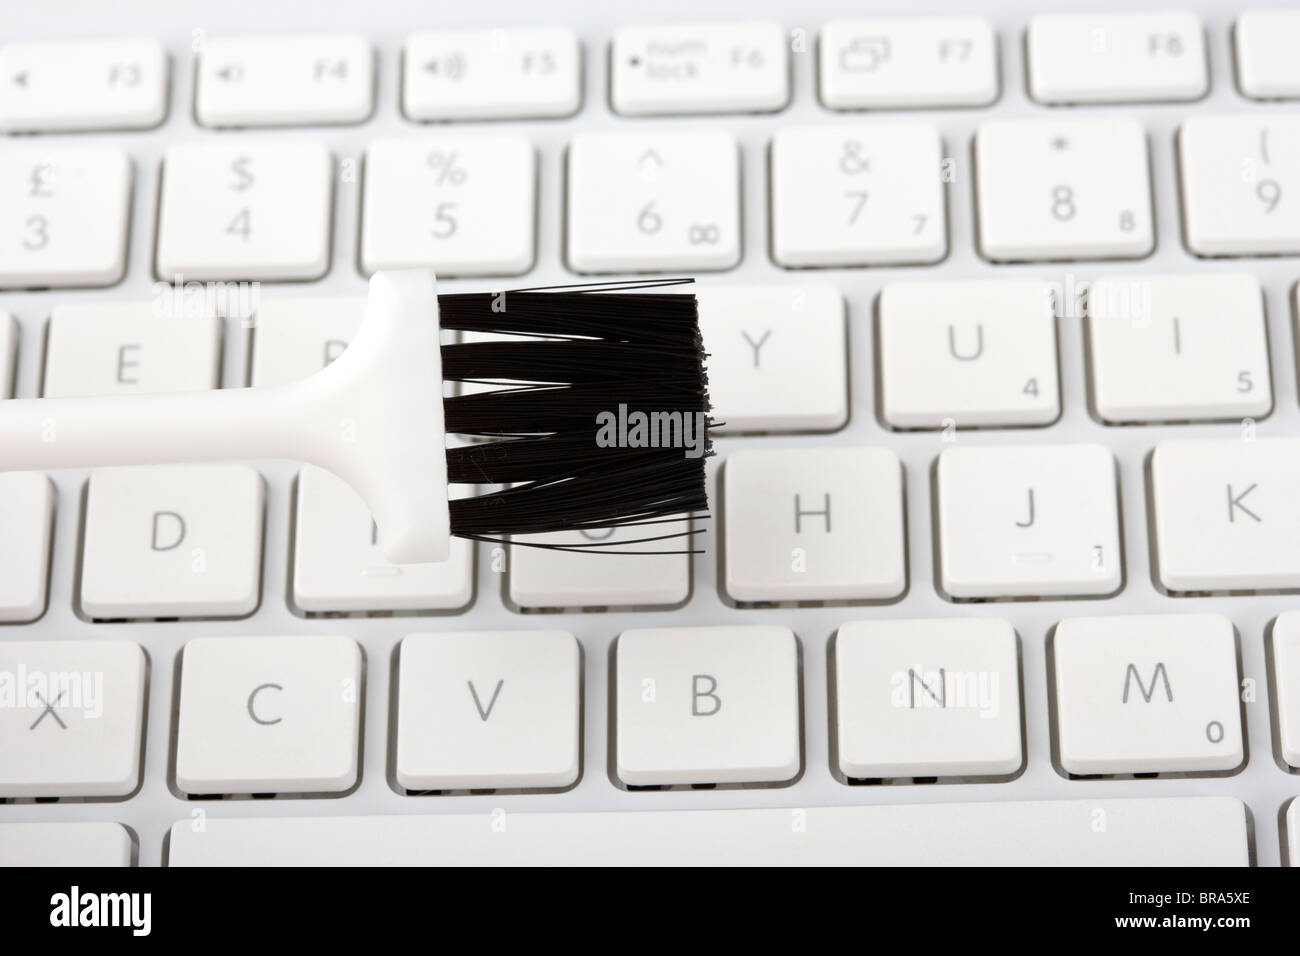 https://c8.alamy.com/comp/BRA5XE/cleaning-a-computer-laptop-keyboard-with-a-small-plastic-brush-BRA5XE.jpg